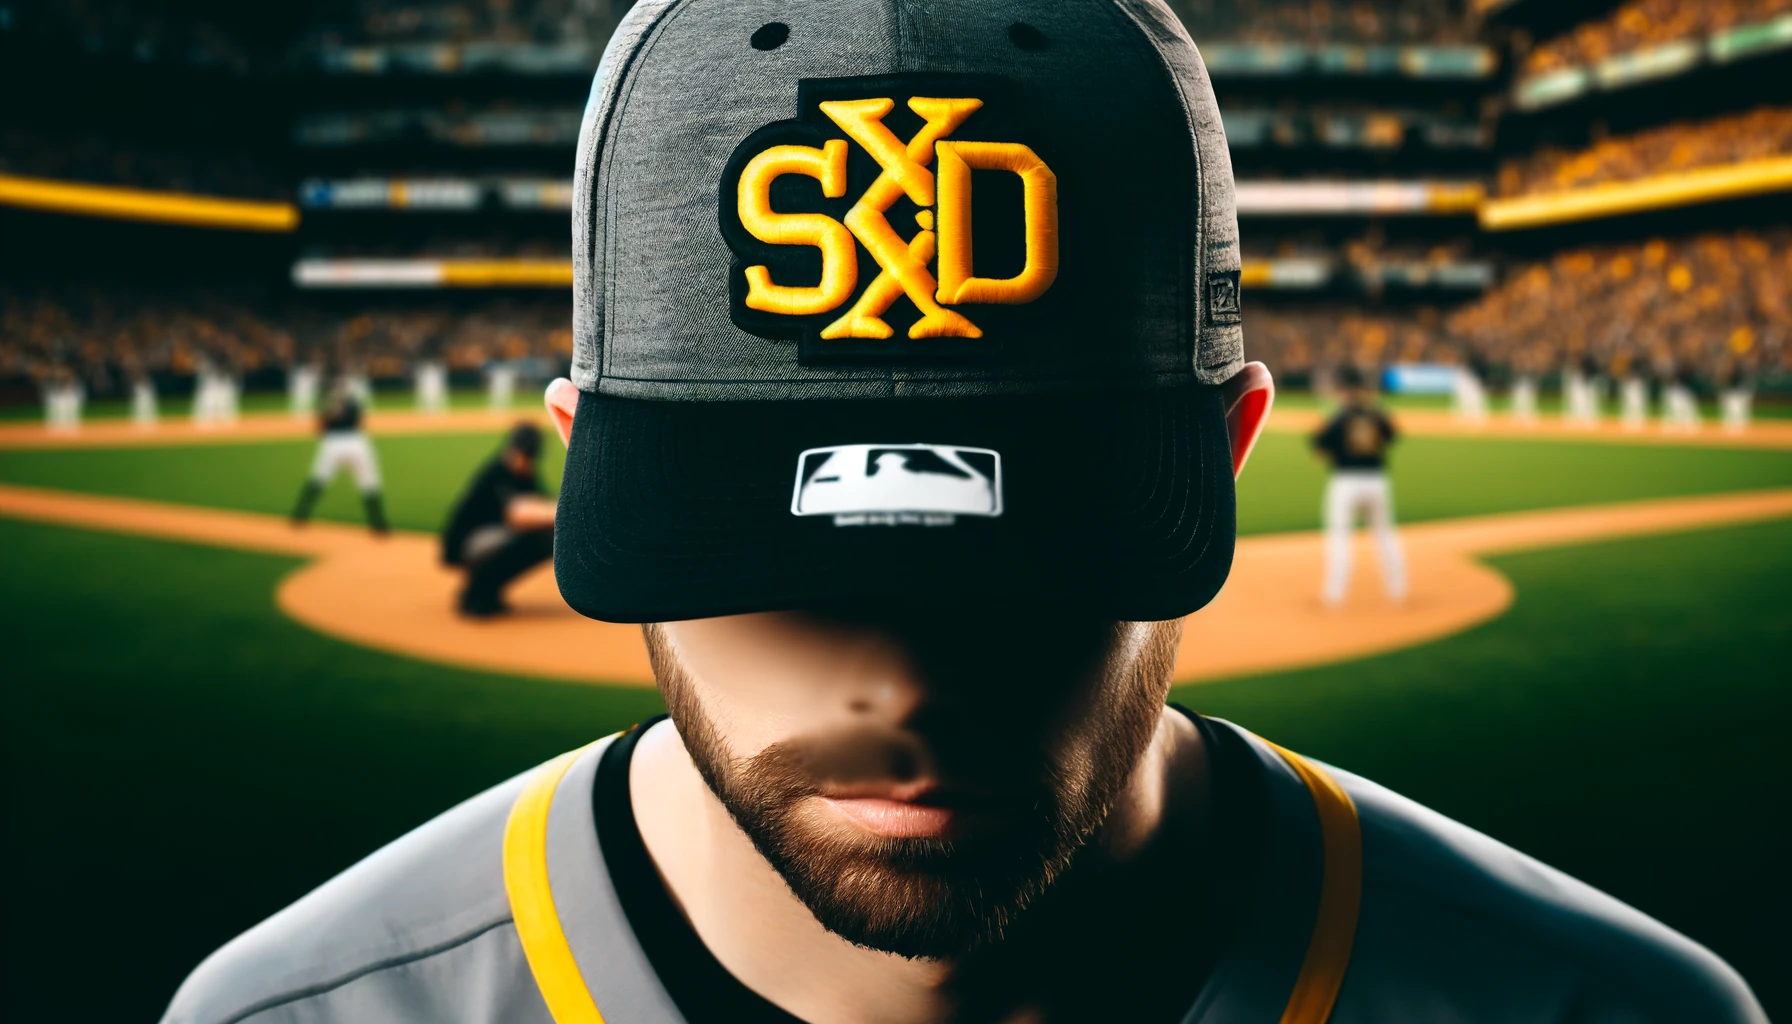 Major League Baseball player wearing a cap featuring a large yellow and black logo in the center, SxD letters included, with the front logo blurred, missing, or not visible. Horizontal aspect ratio (16:9).